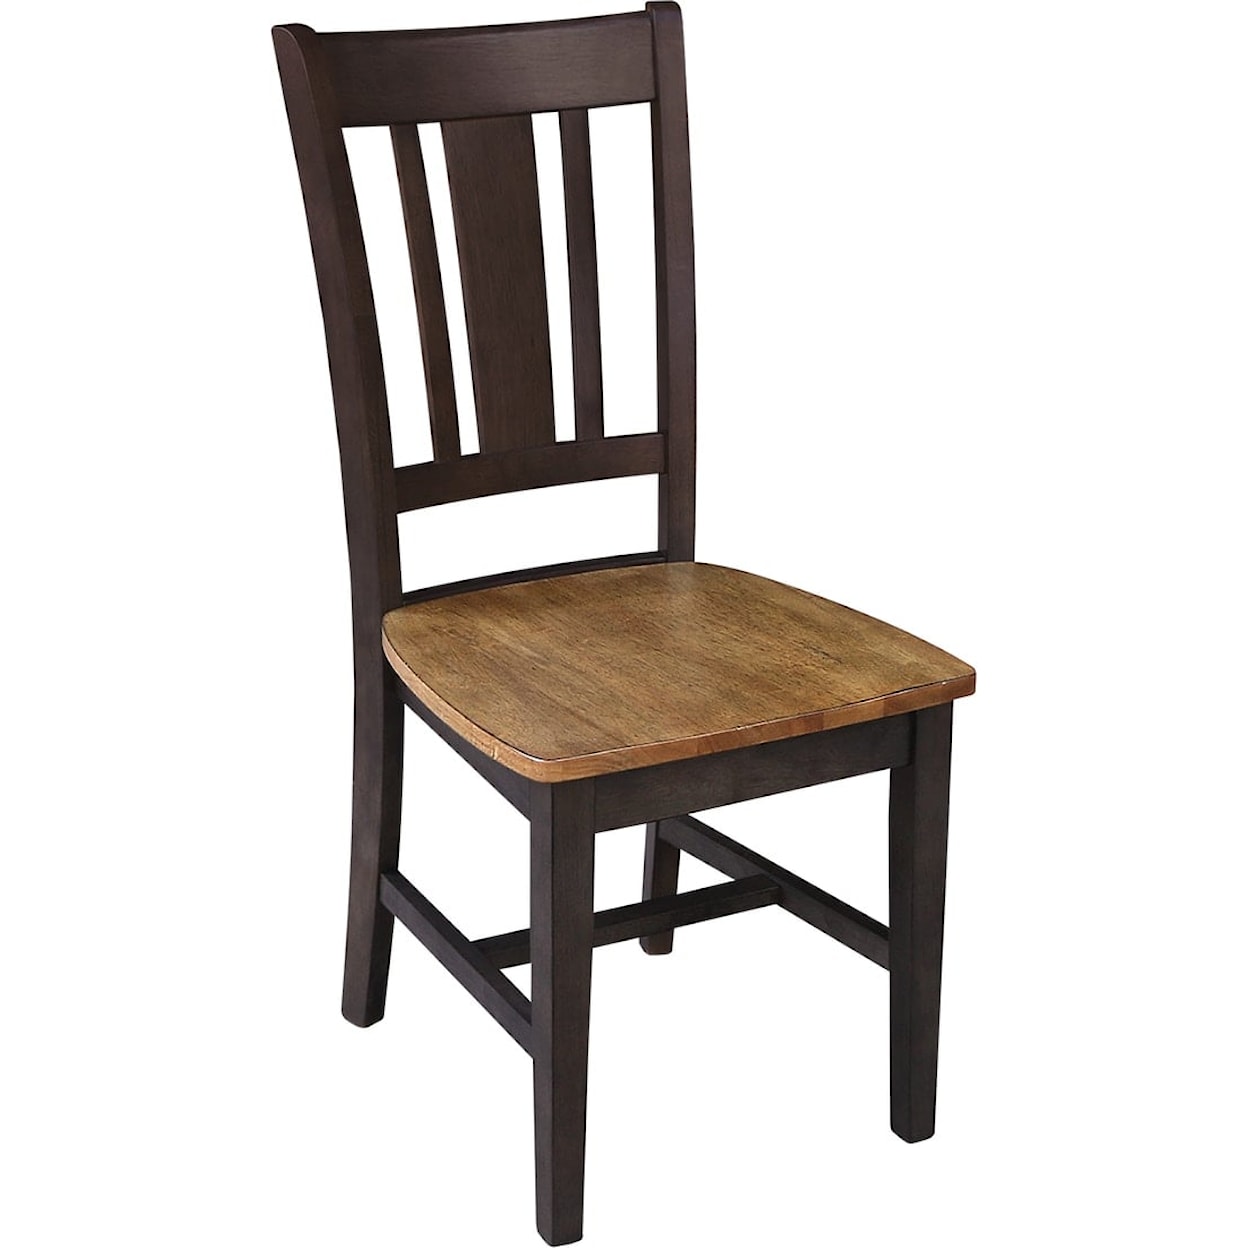 John Thomas Dining Essentials San Remo Side Chair in Hickory/Coal